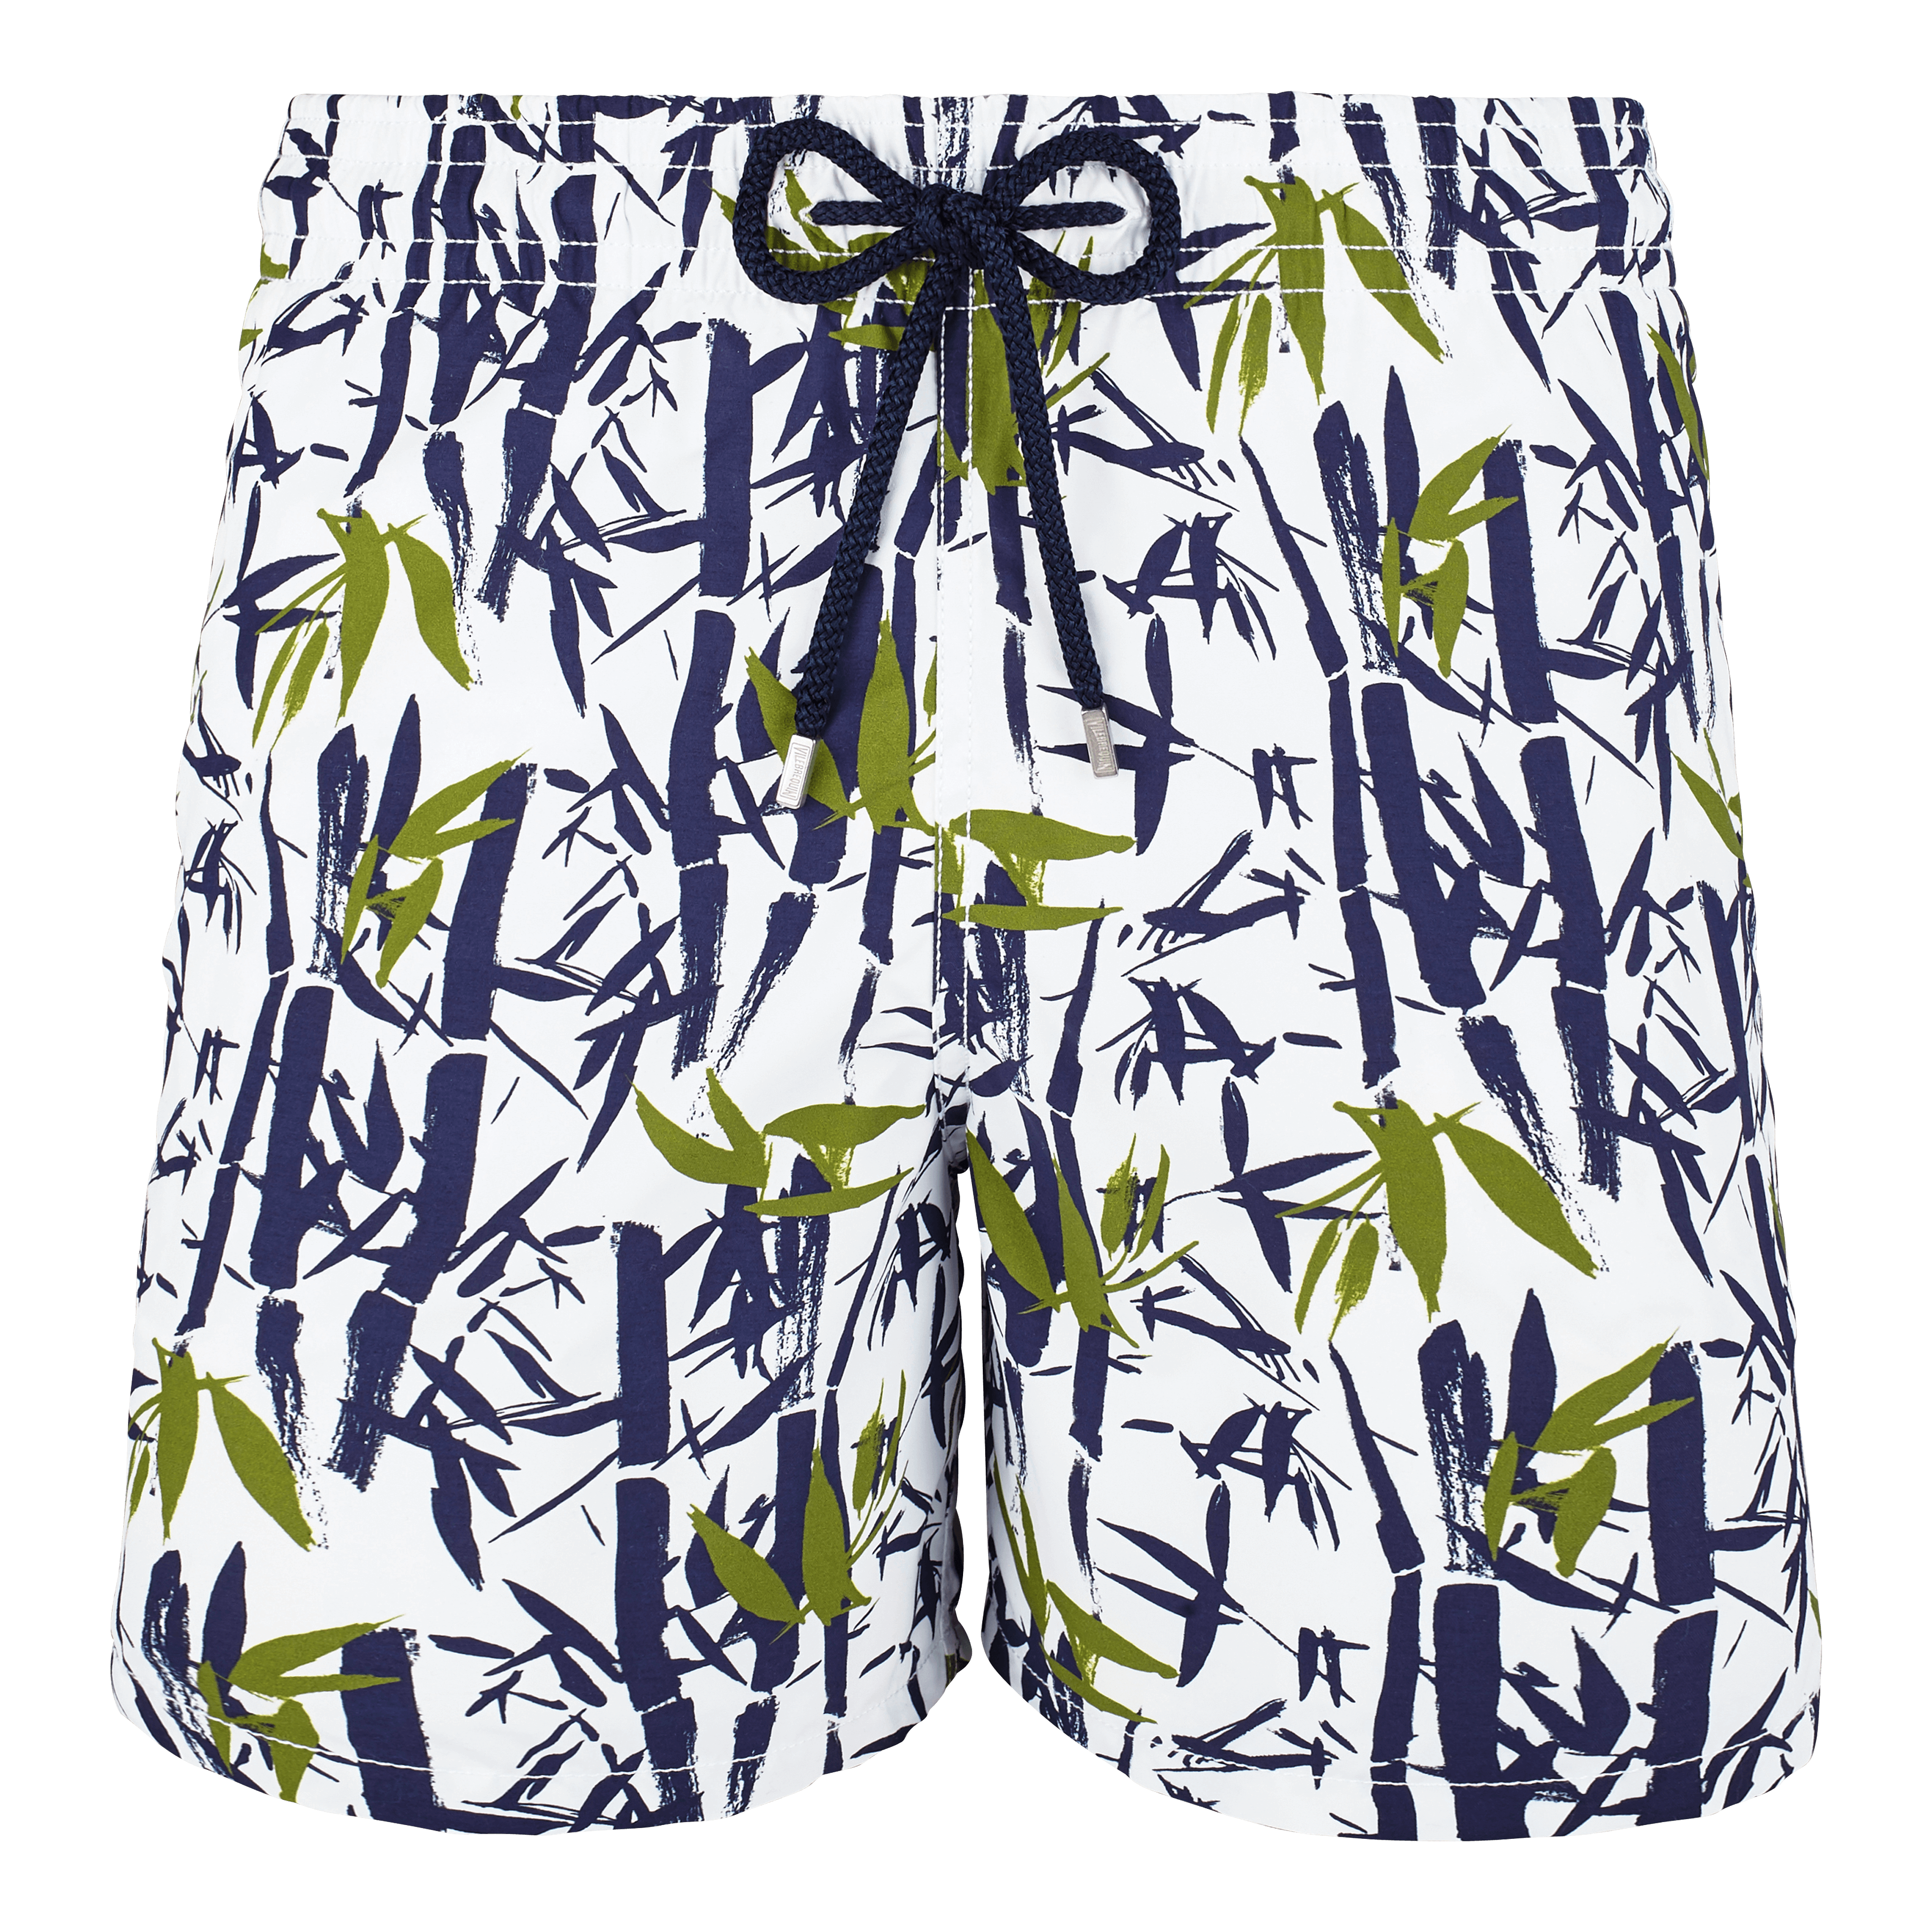 Ss miami fashion week. Swimsuit clipart mens shorts